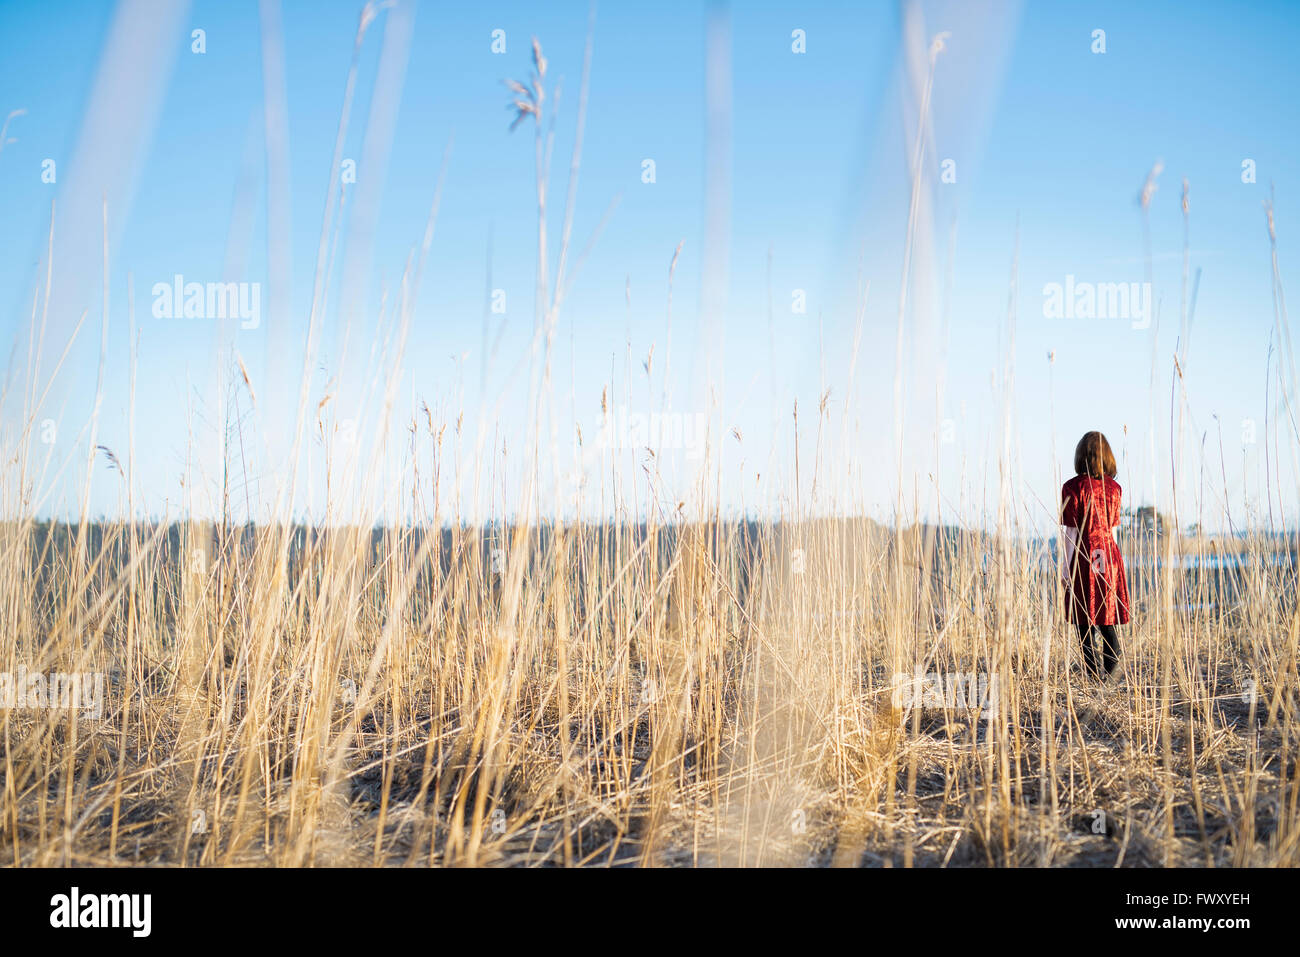 Finland, Varsinais-Suomi, Young woman standing in field Stock Photo